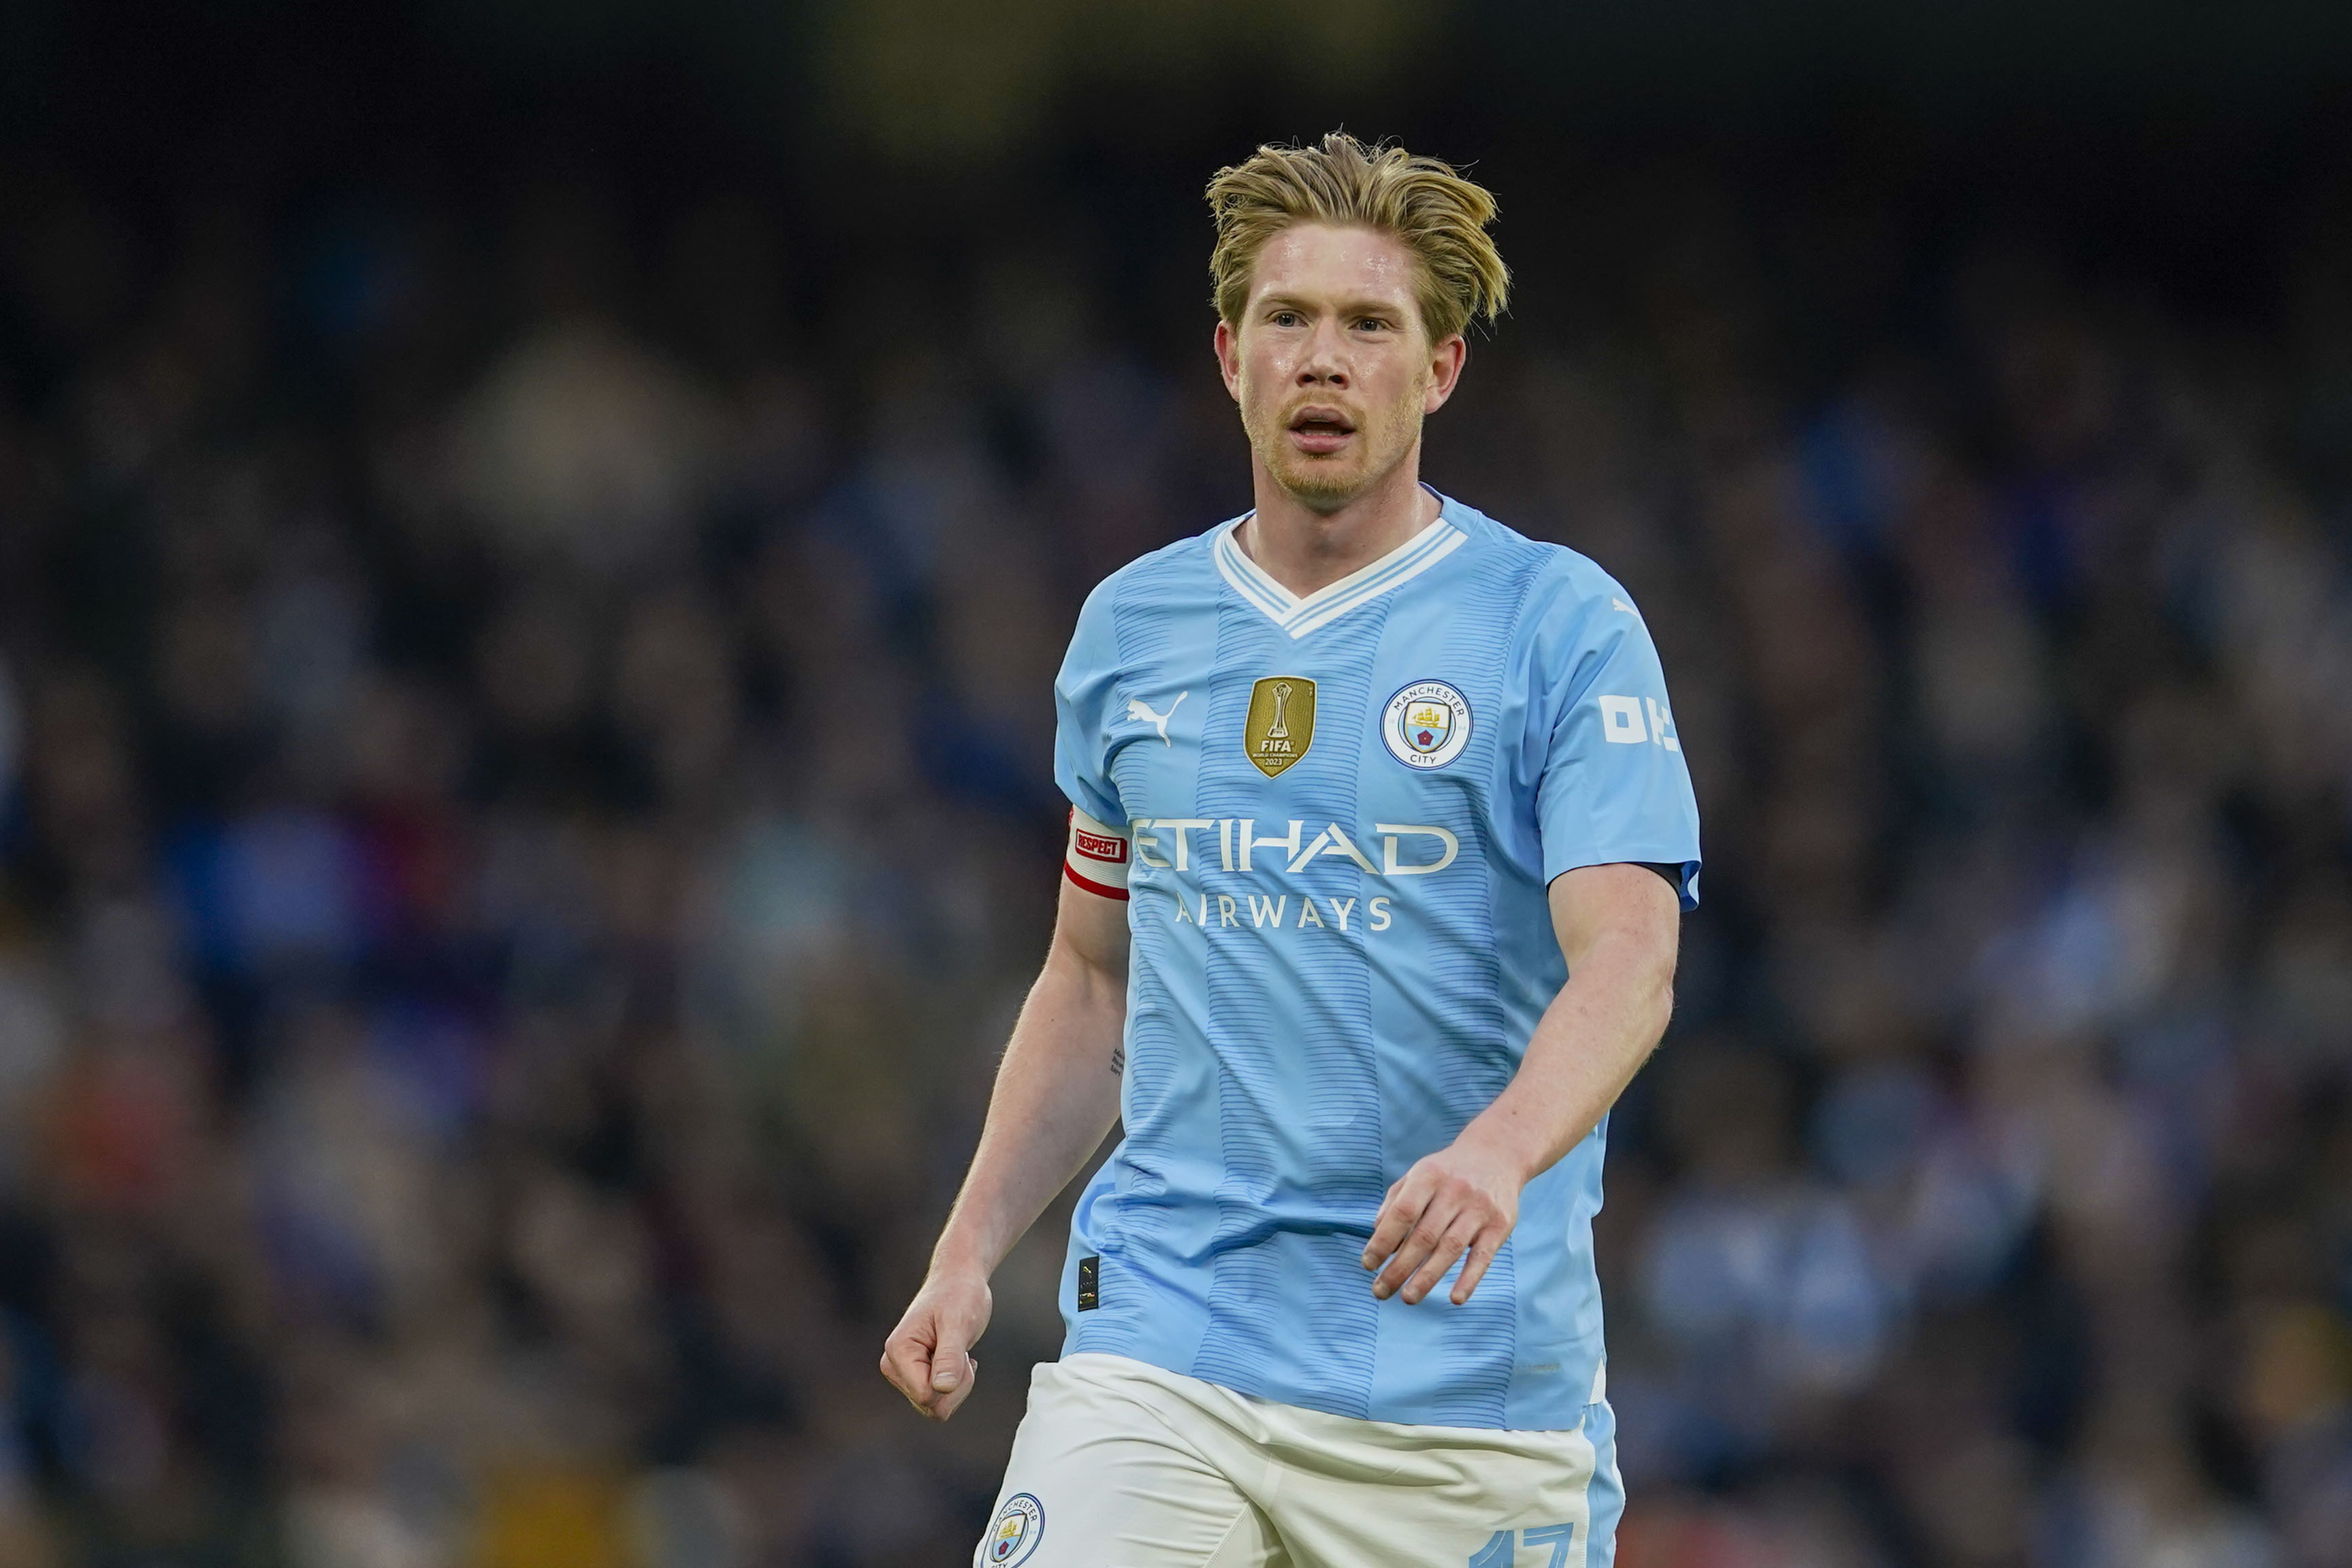 Man City's Haaland out until end of January, says Guardiola